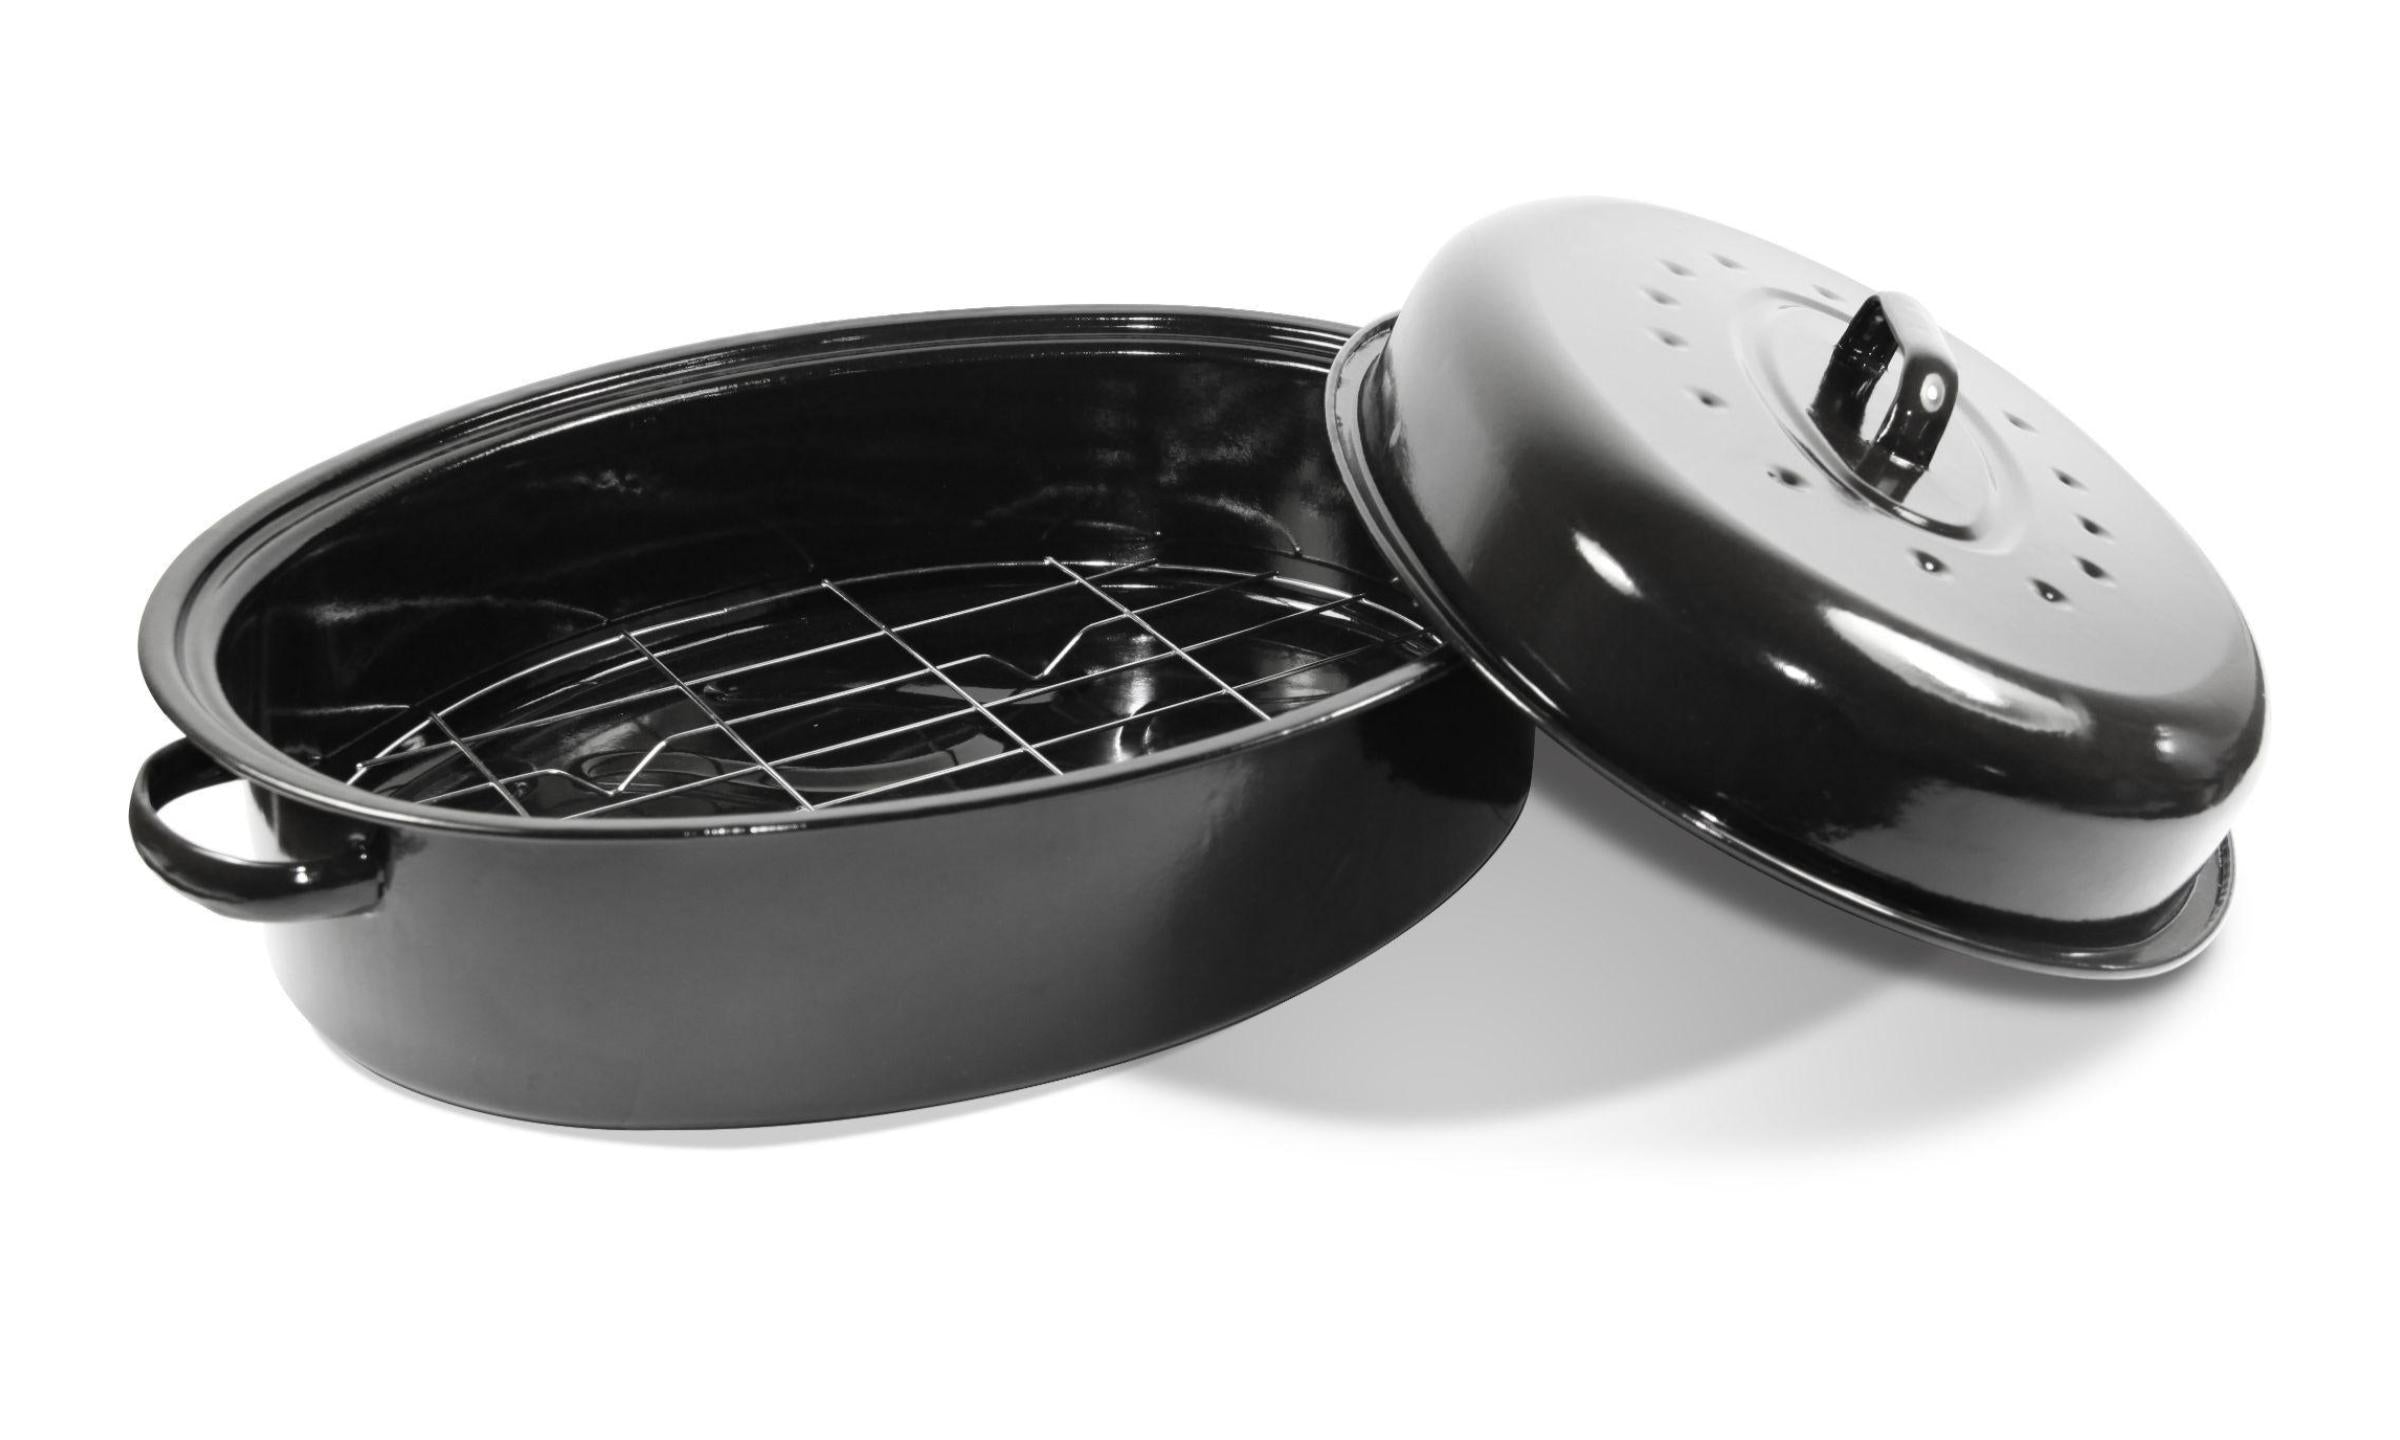 Lexi Home 16.5 inch Non-Stick Carbon Steel Roasting Pan with V-Rack